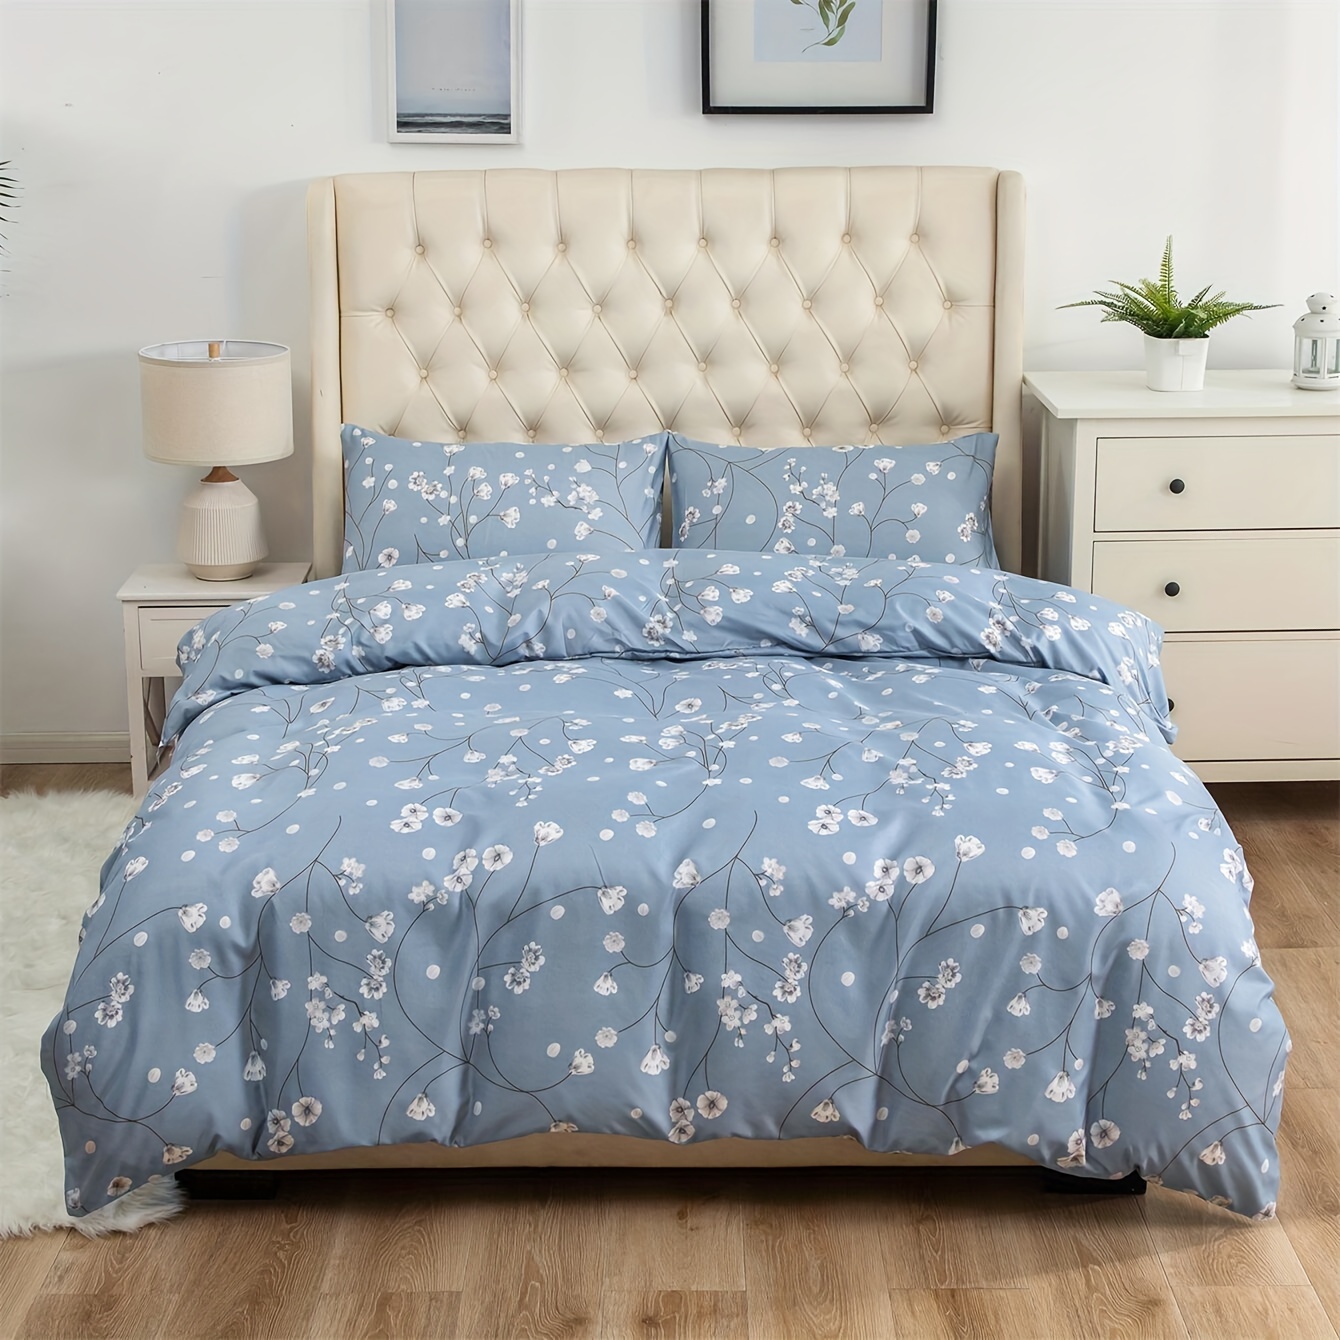 

3-piece Bedding Set: 1 Duvet Cover (without Filler) + 2 Pillow Cases (no Pillow Core) - Lightweight, Floral Design, Machine Washable, Suitable For All Seasons